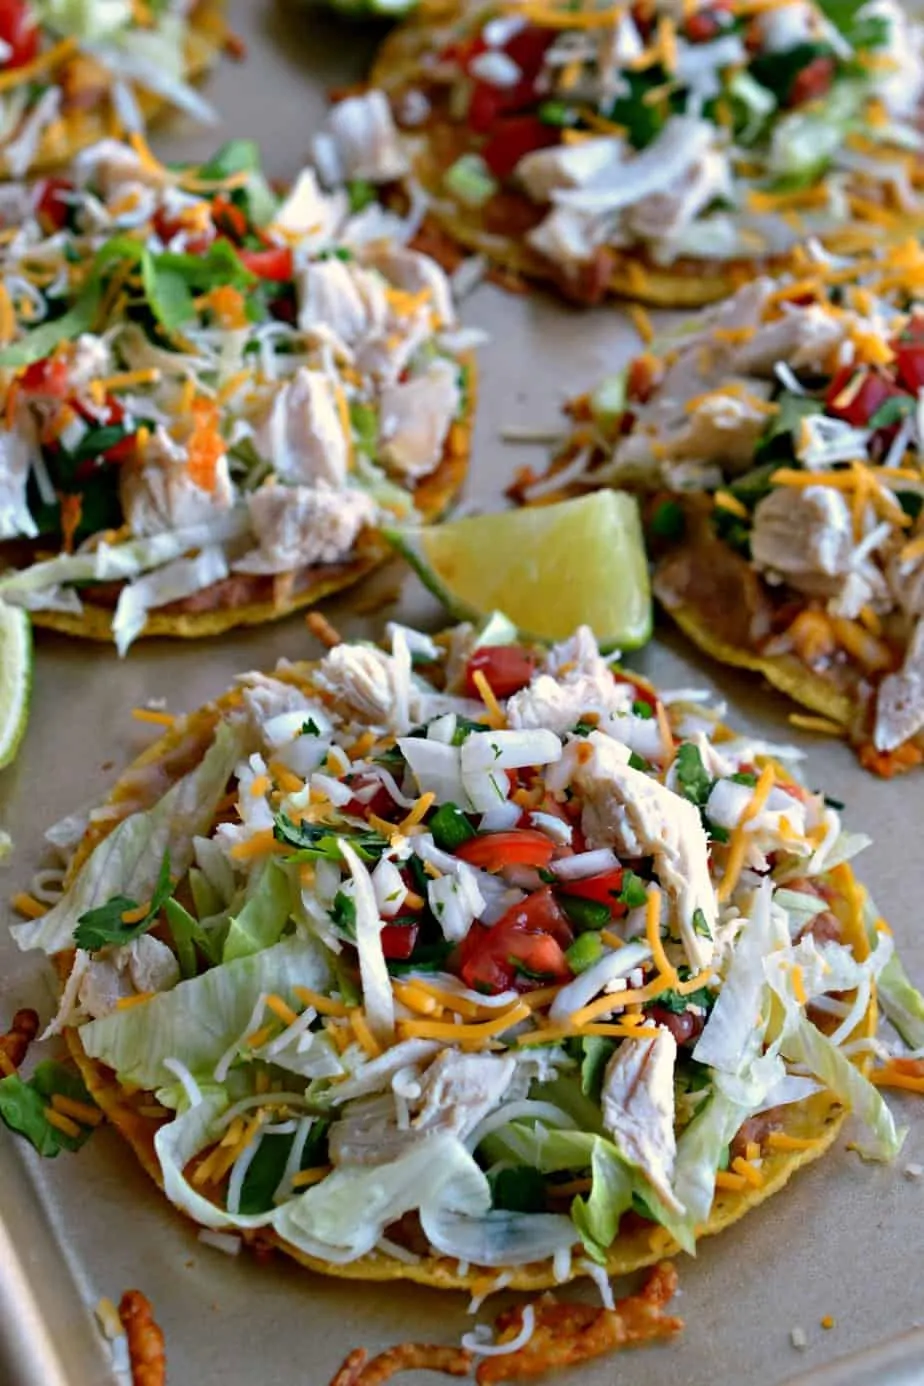 A five ingredient Pico de Gallo, refried beans, and Mexican Blend cheese take these chicken tostadas to the next level.  